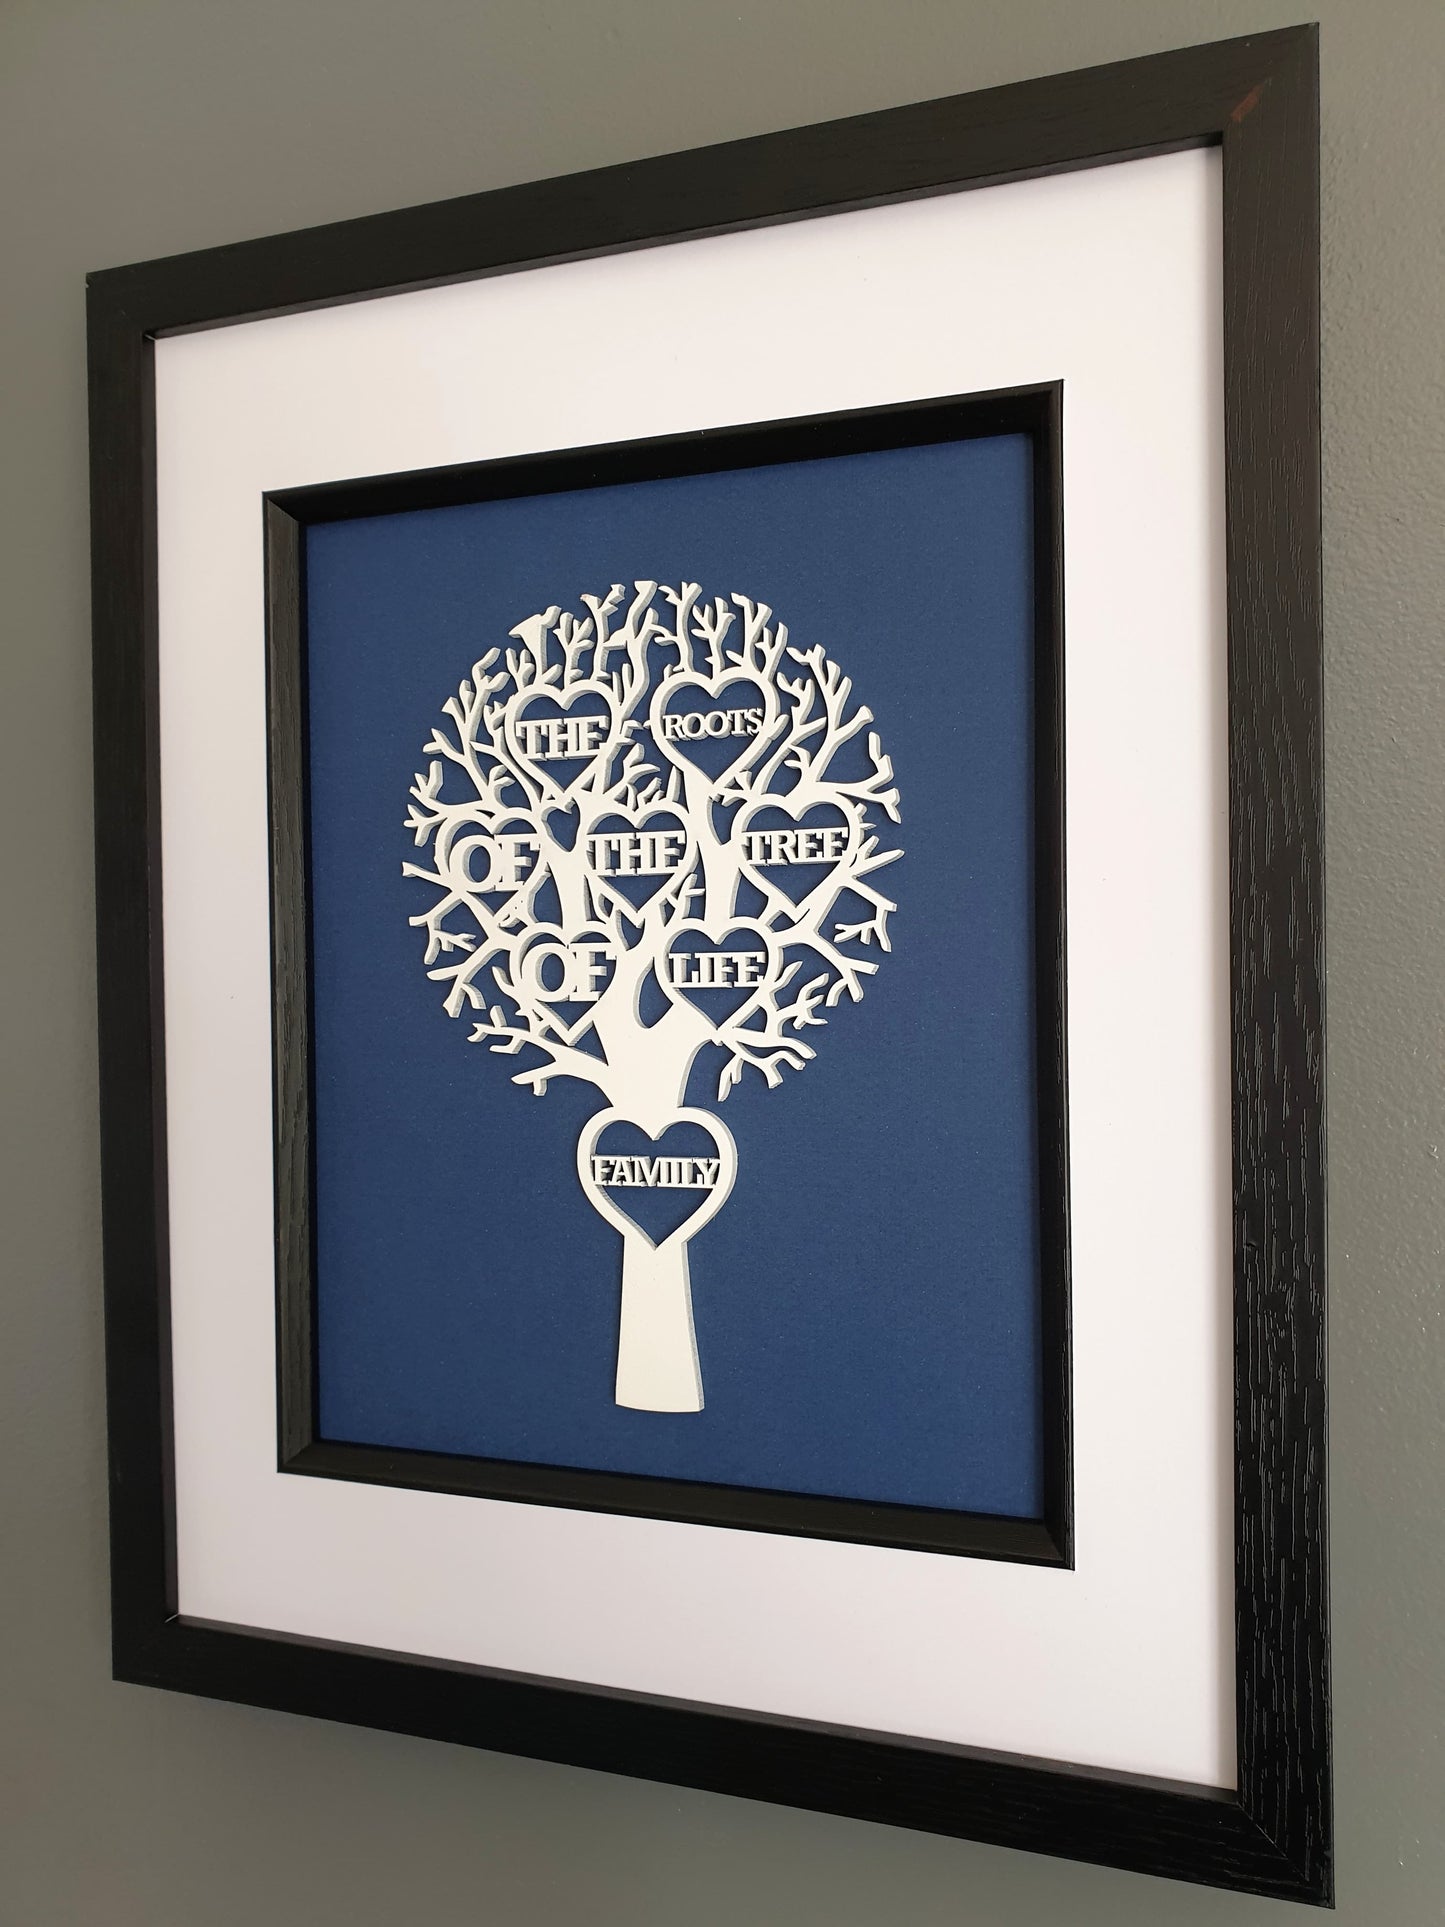 Framed Laser Cut Tree - Family, The Roots Of The Tree Of Life